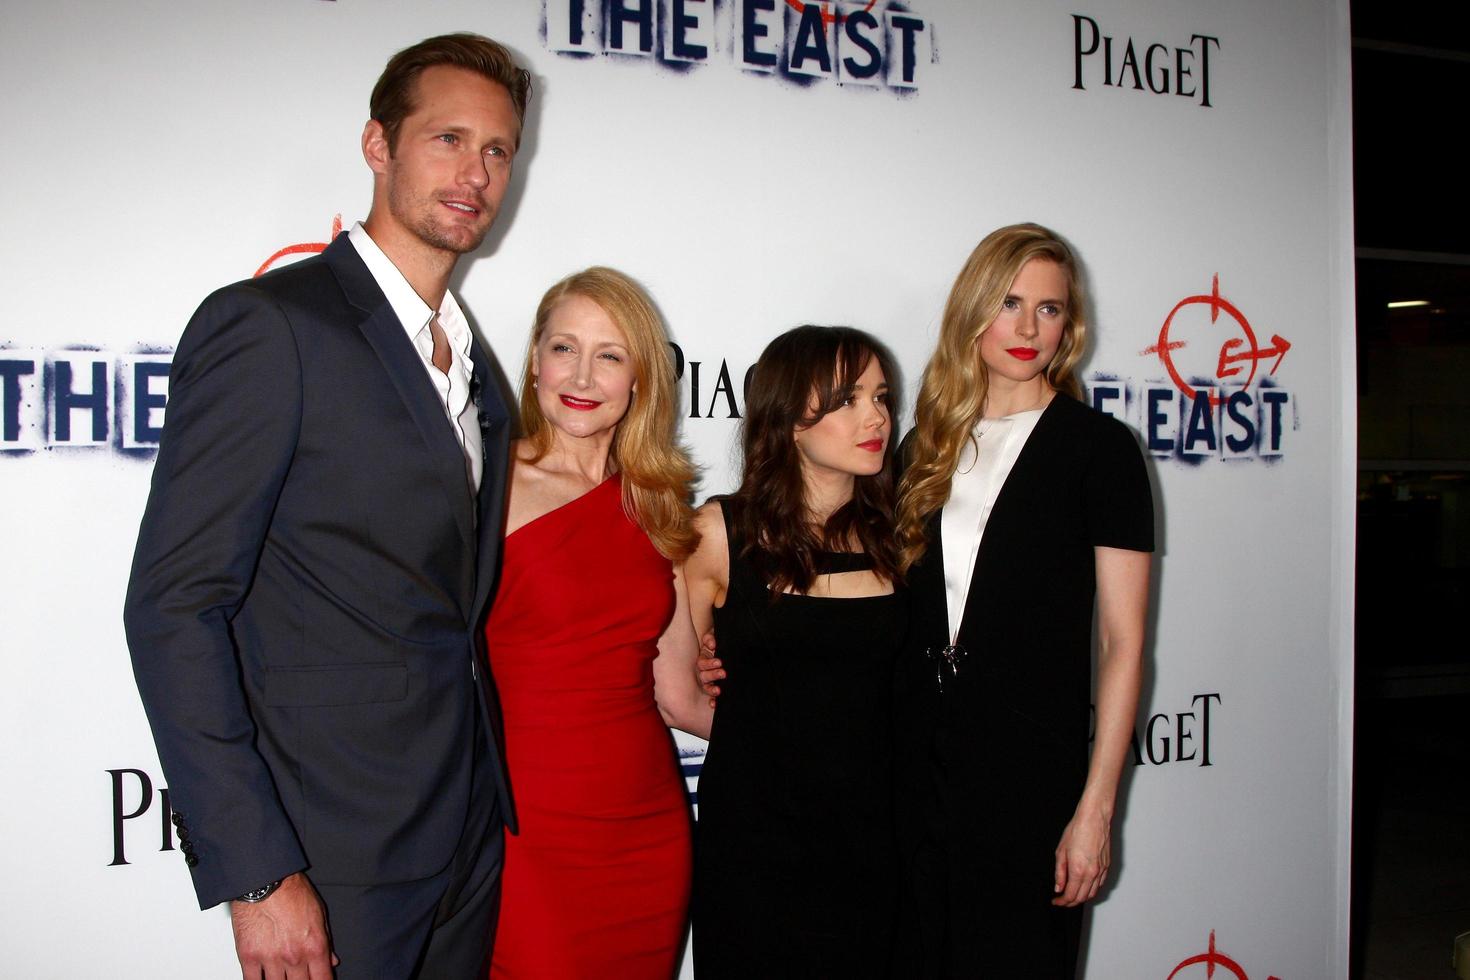 LOS ANGELES, MAY 28 - Patricia Clarkson, Alexander Skarsgard, Ellen Page, Brit Marling arrives at The East LA Premiere at the ArcLight Hollywood Theaters on May 28, 2013 in Los Angeles, CA photo